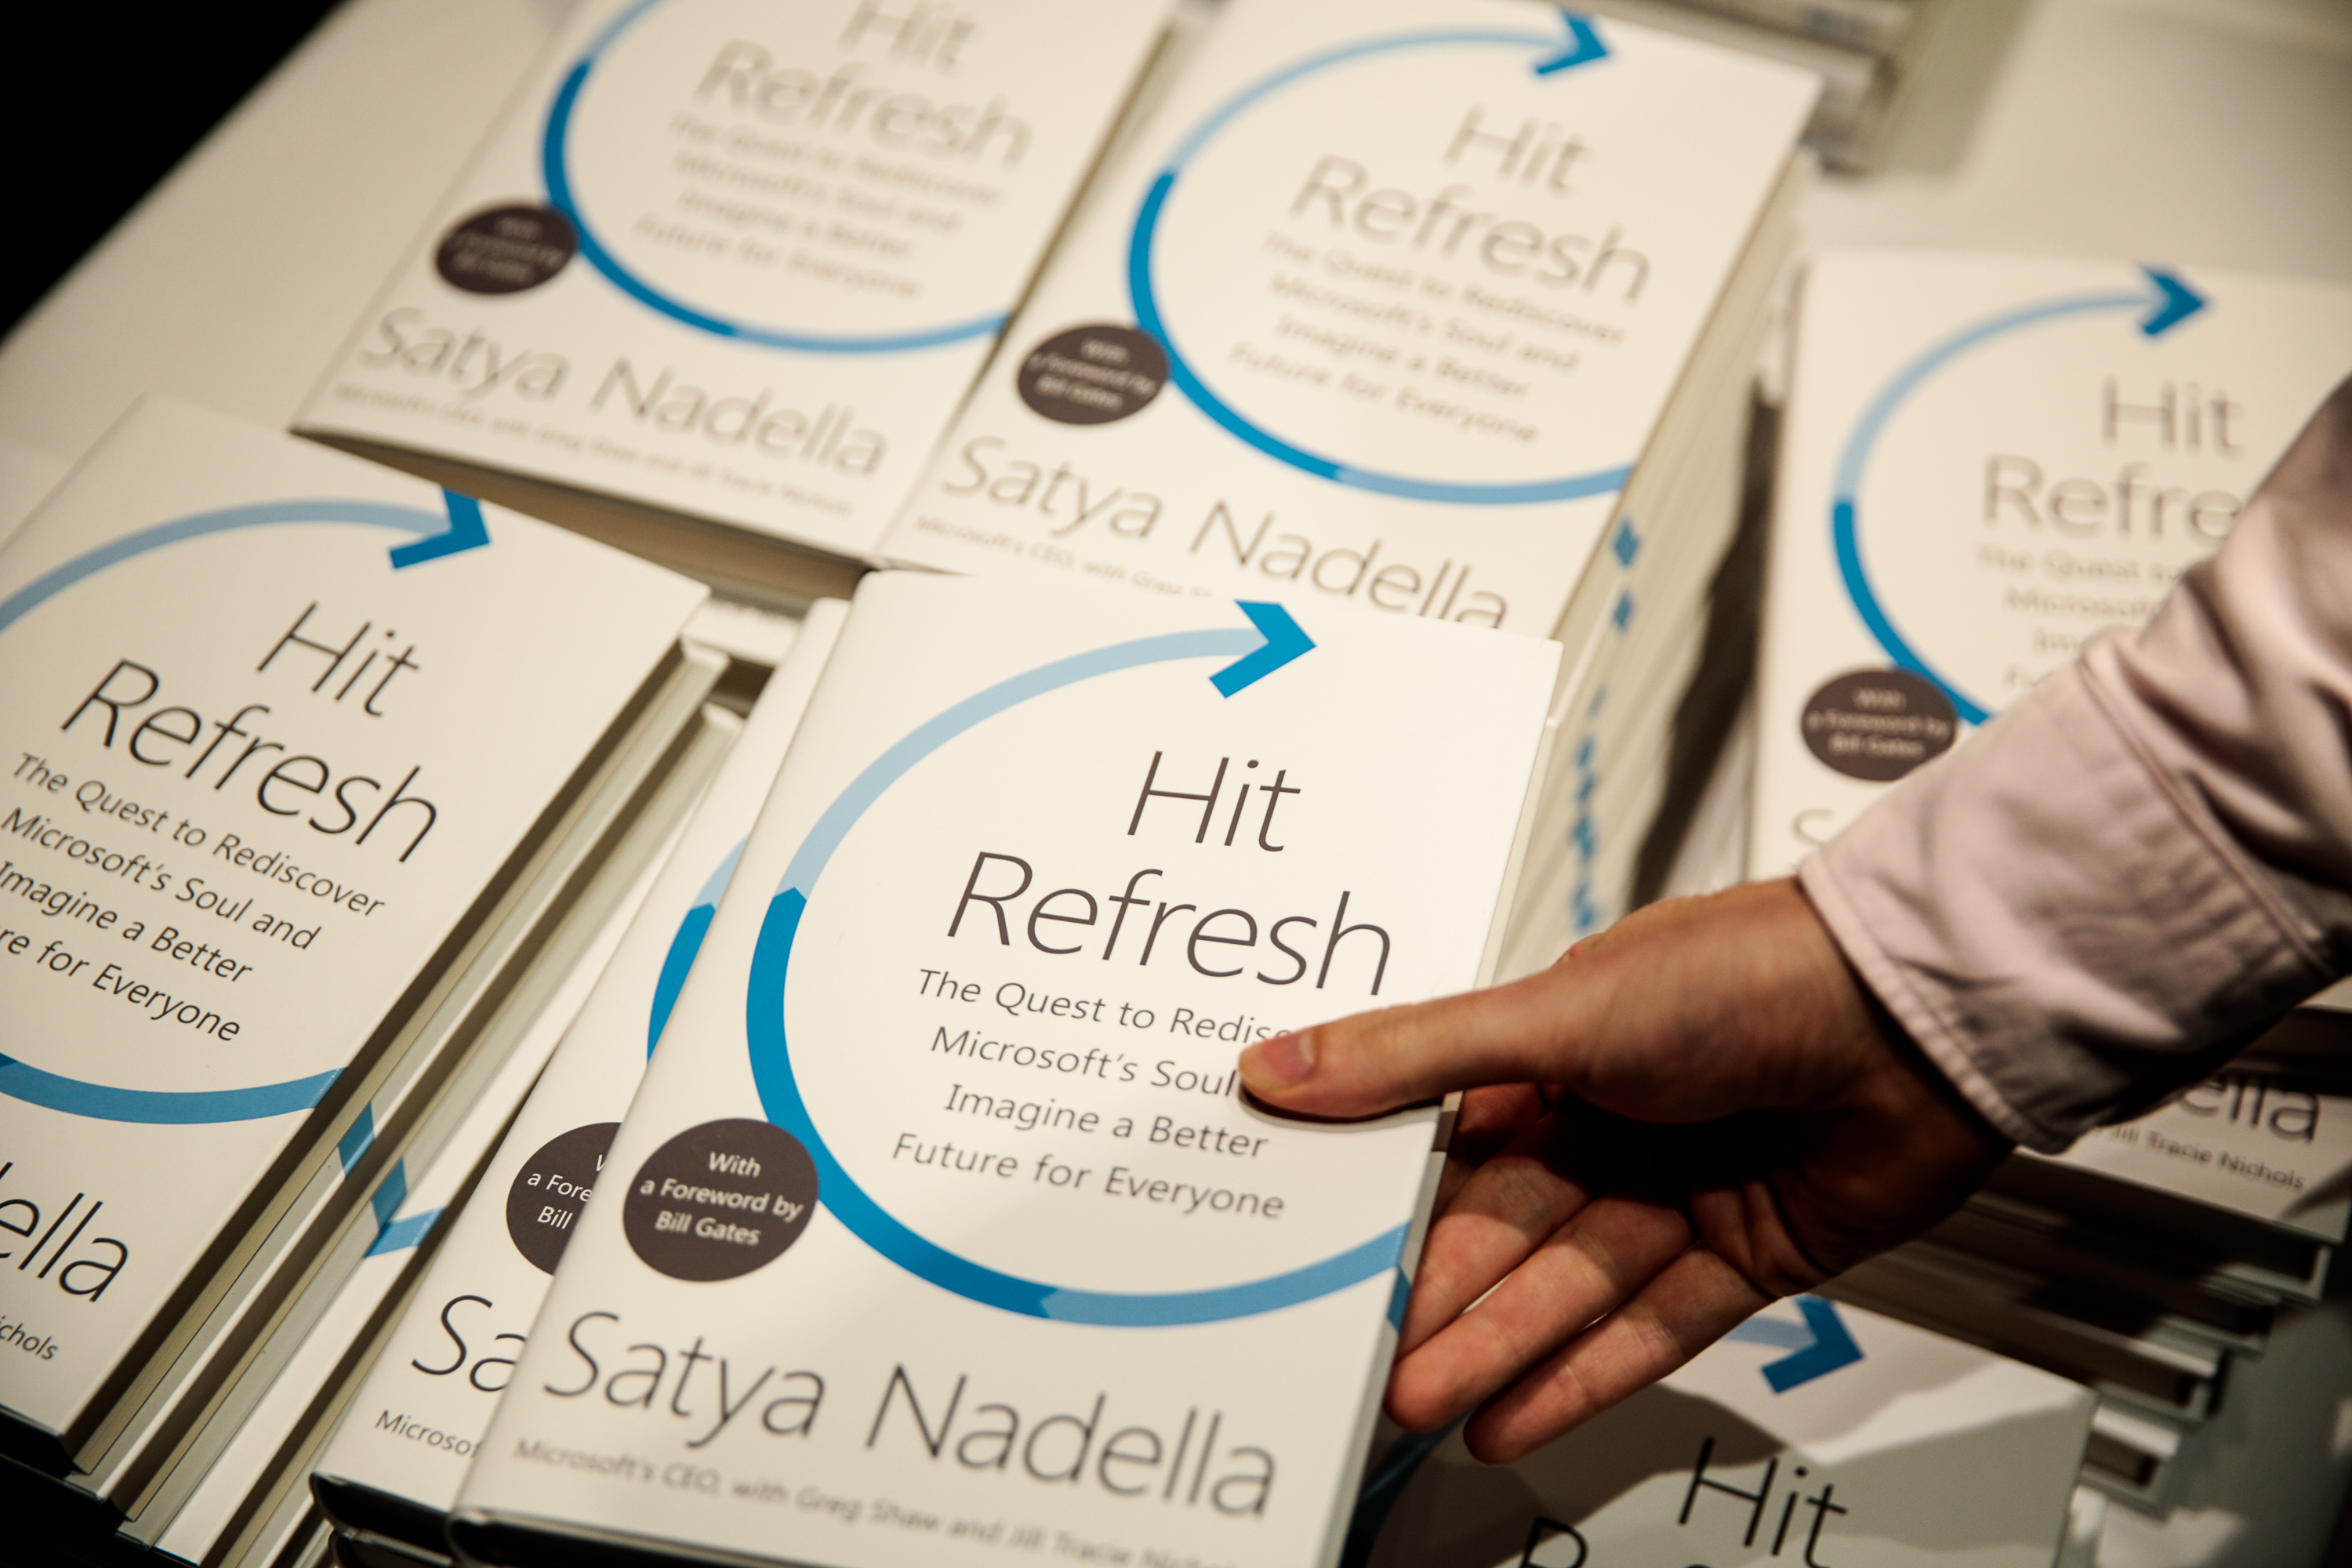 A person takes a copy of Hit Refresh, by Satya Nadella, from a table